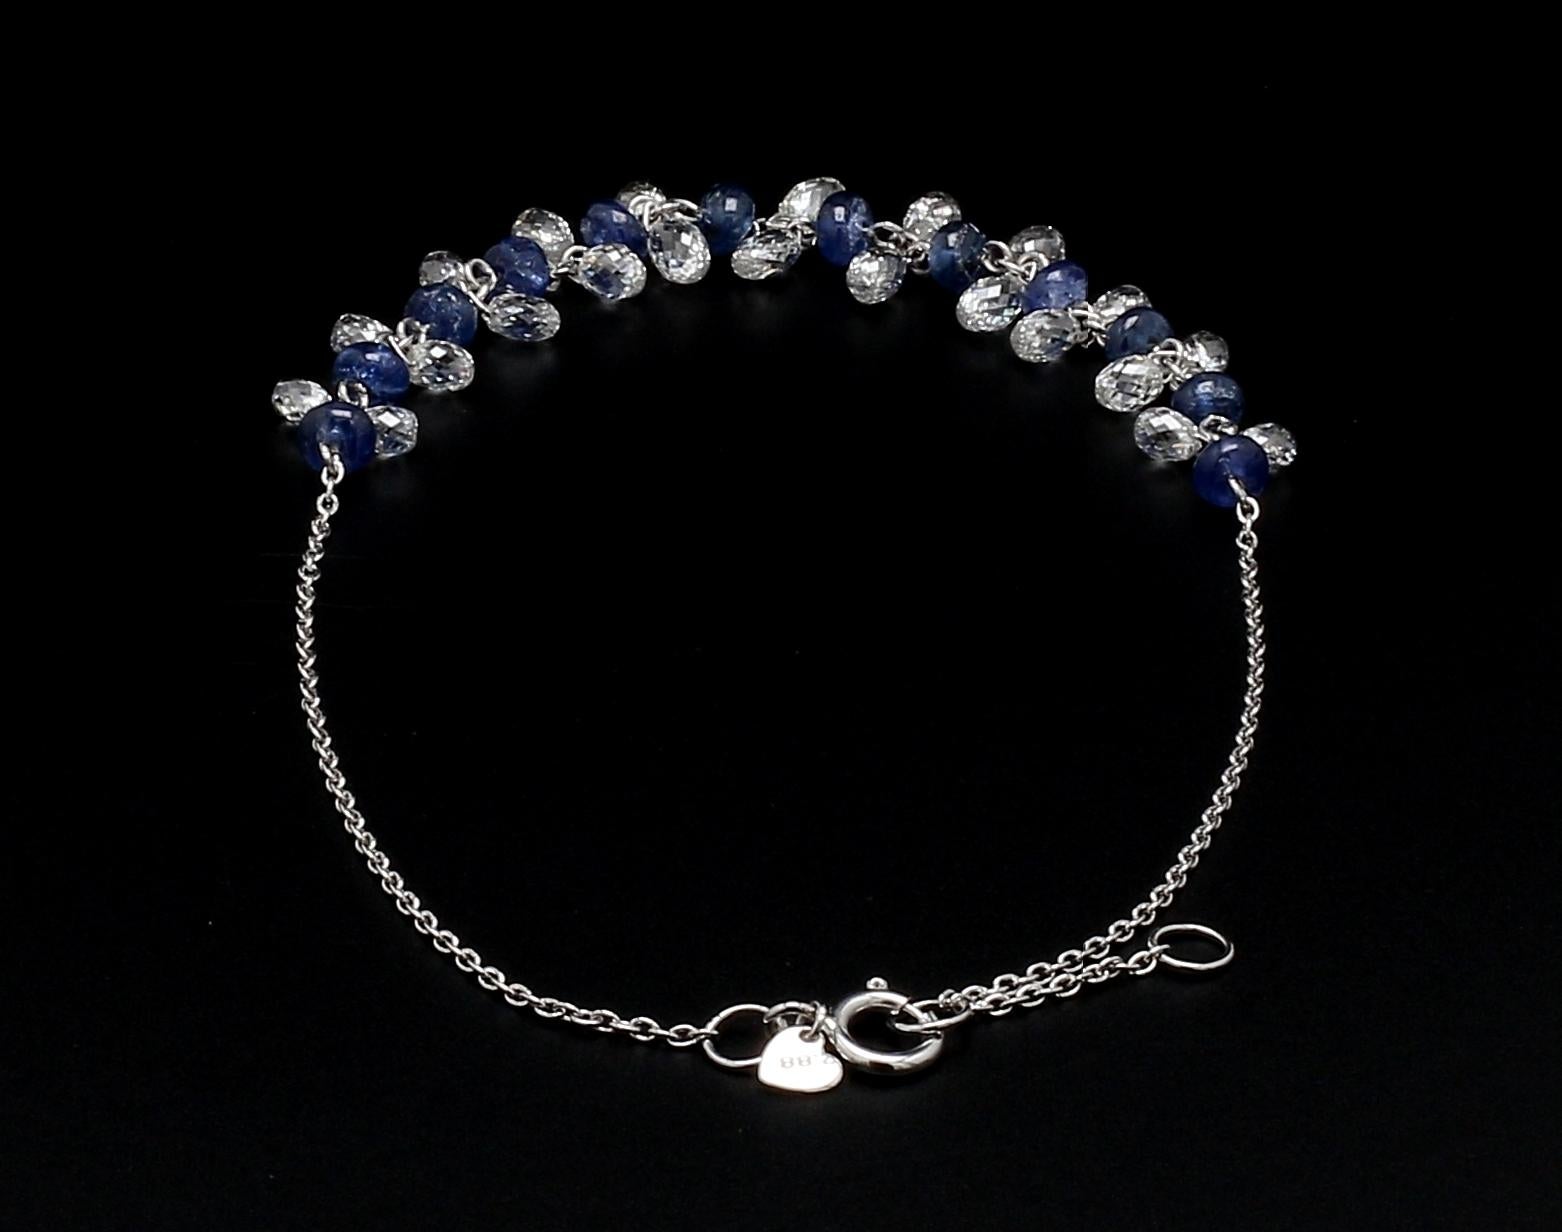 Panim Briolette Diamond and Sapphire 18K White Gold Dangling Bracelet In New Condition For Sale In Tsim Sha Tsui, Hong Kong